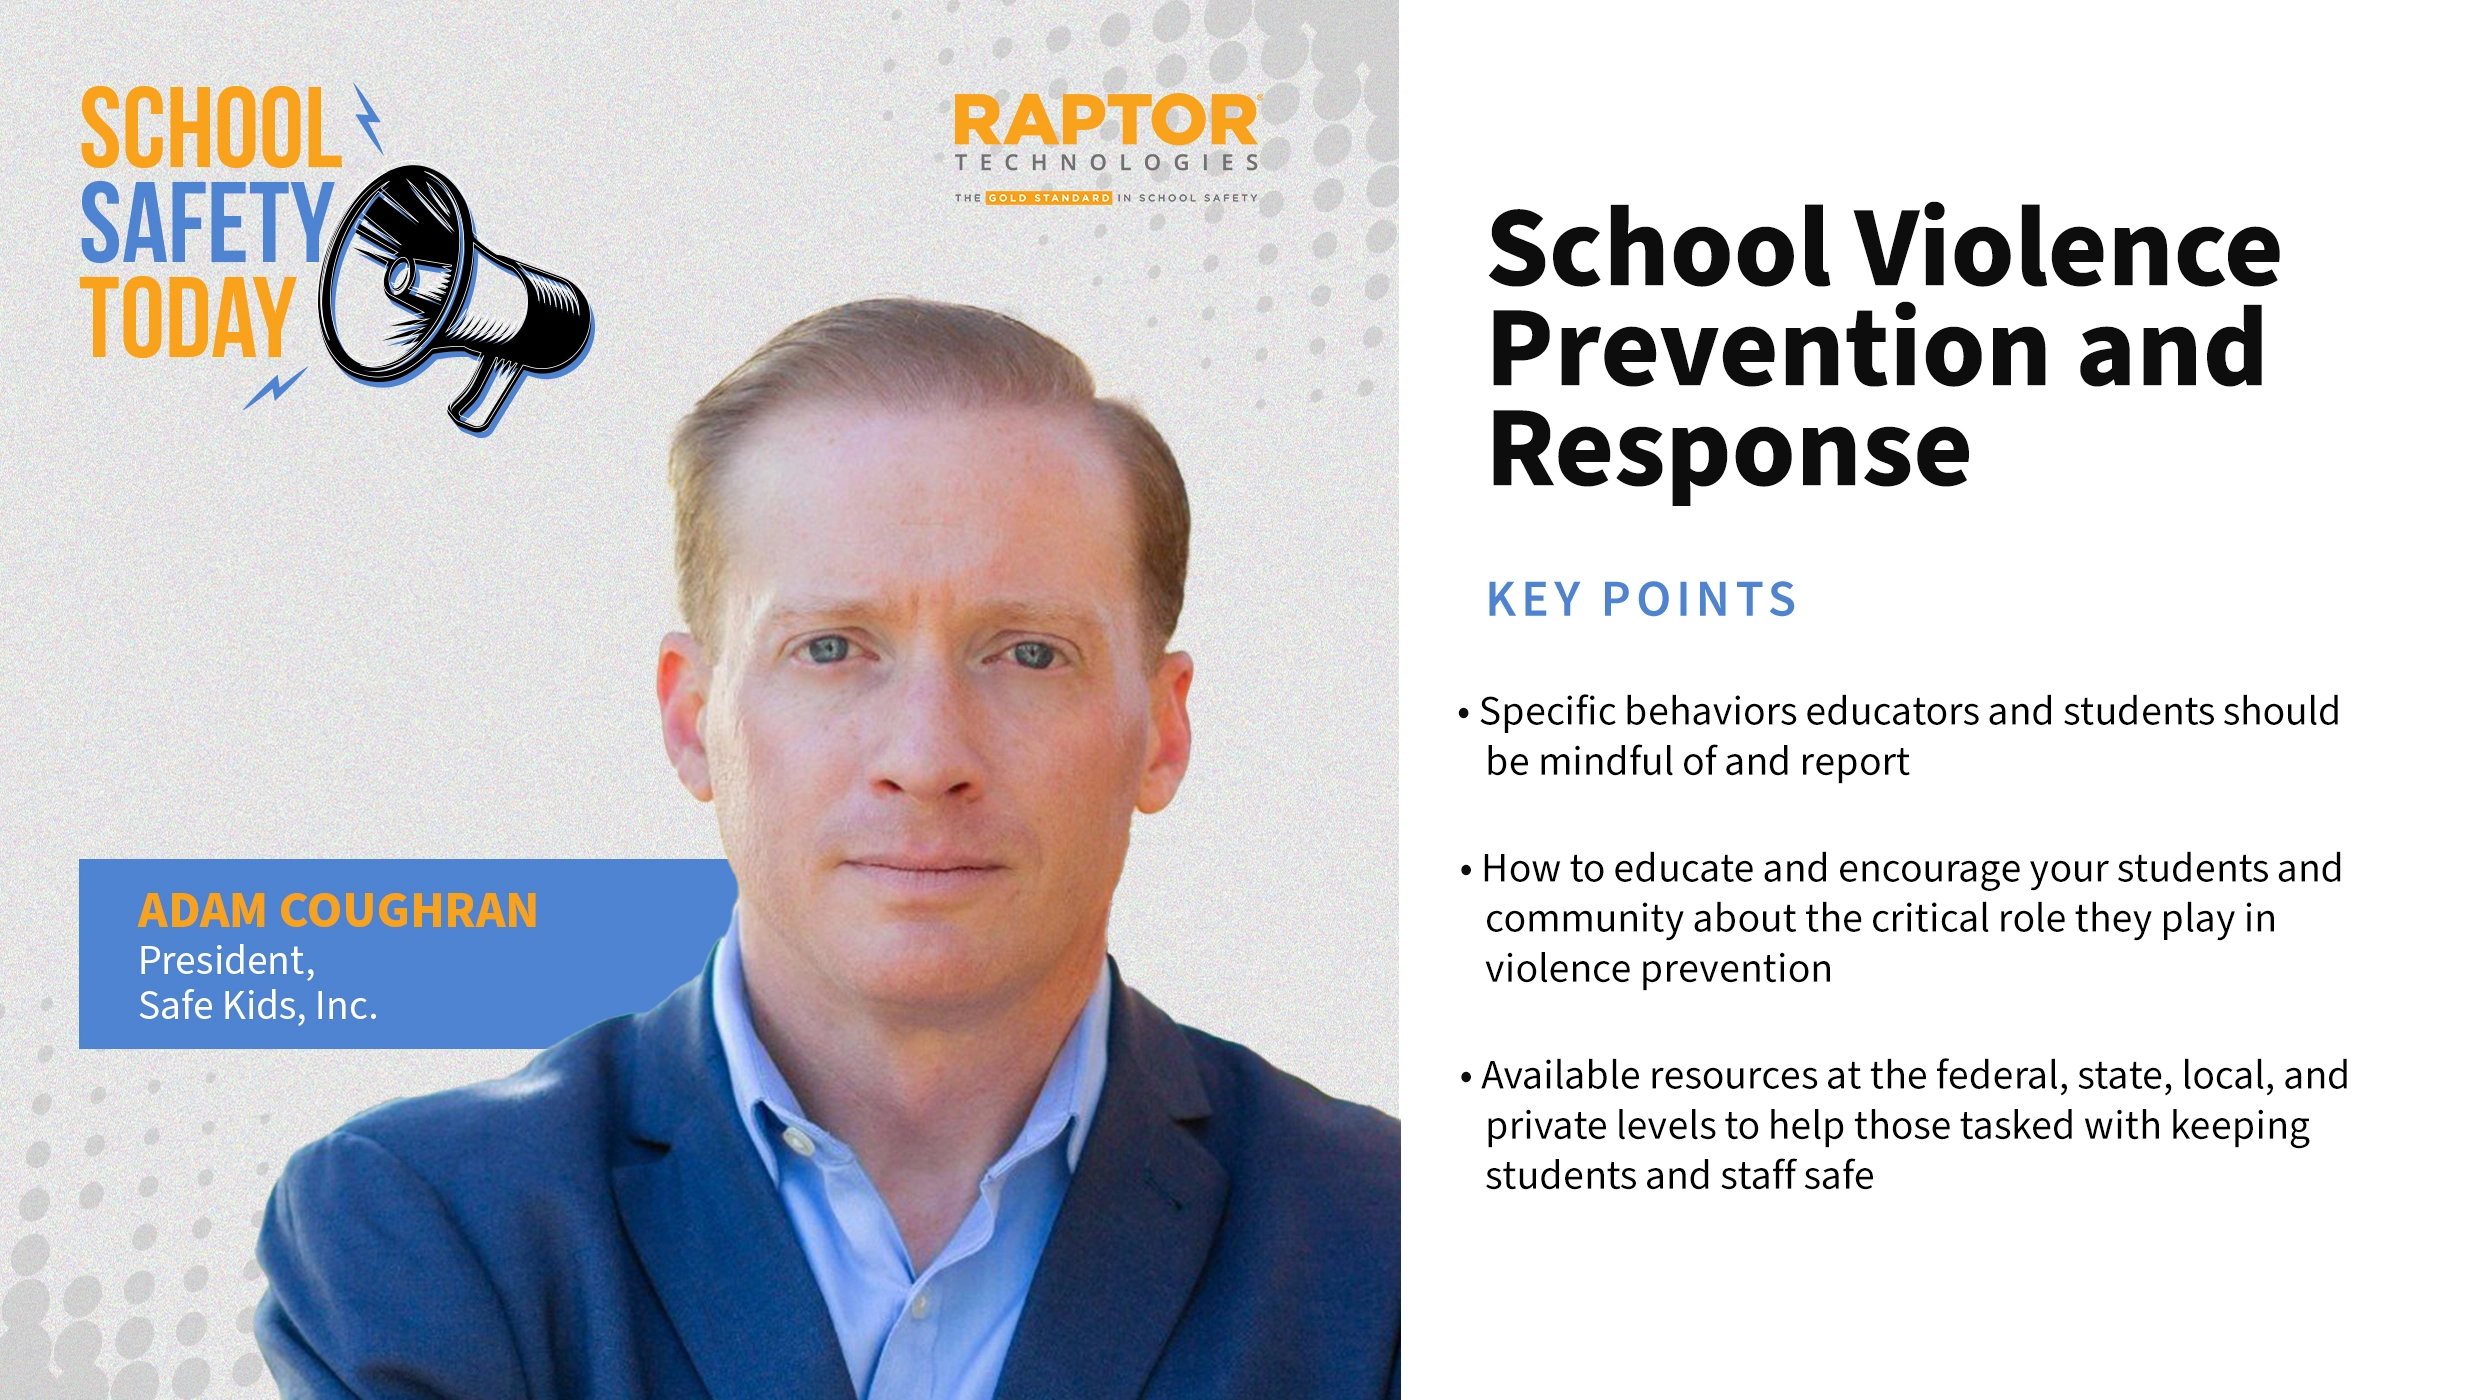 School Violence Prevention and Response